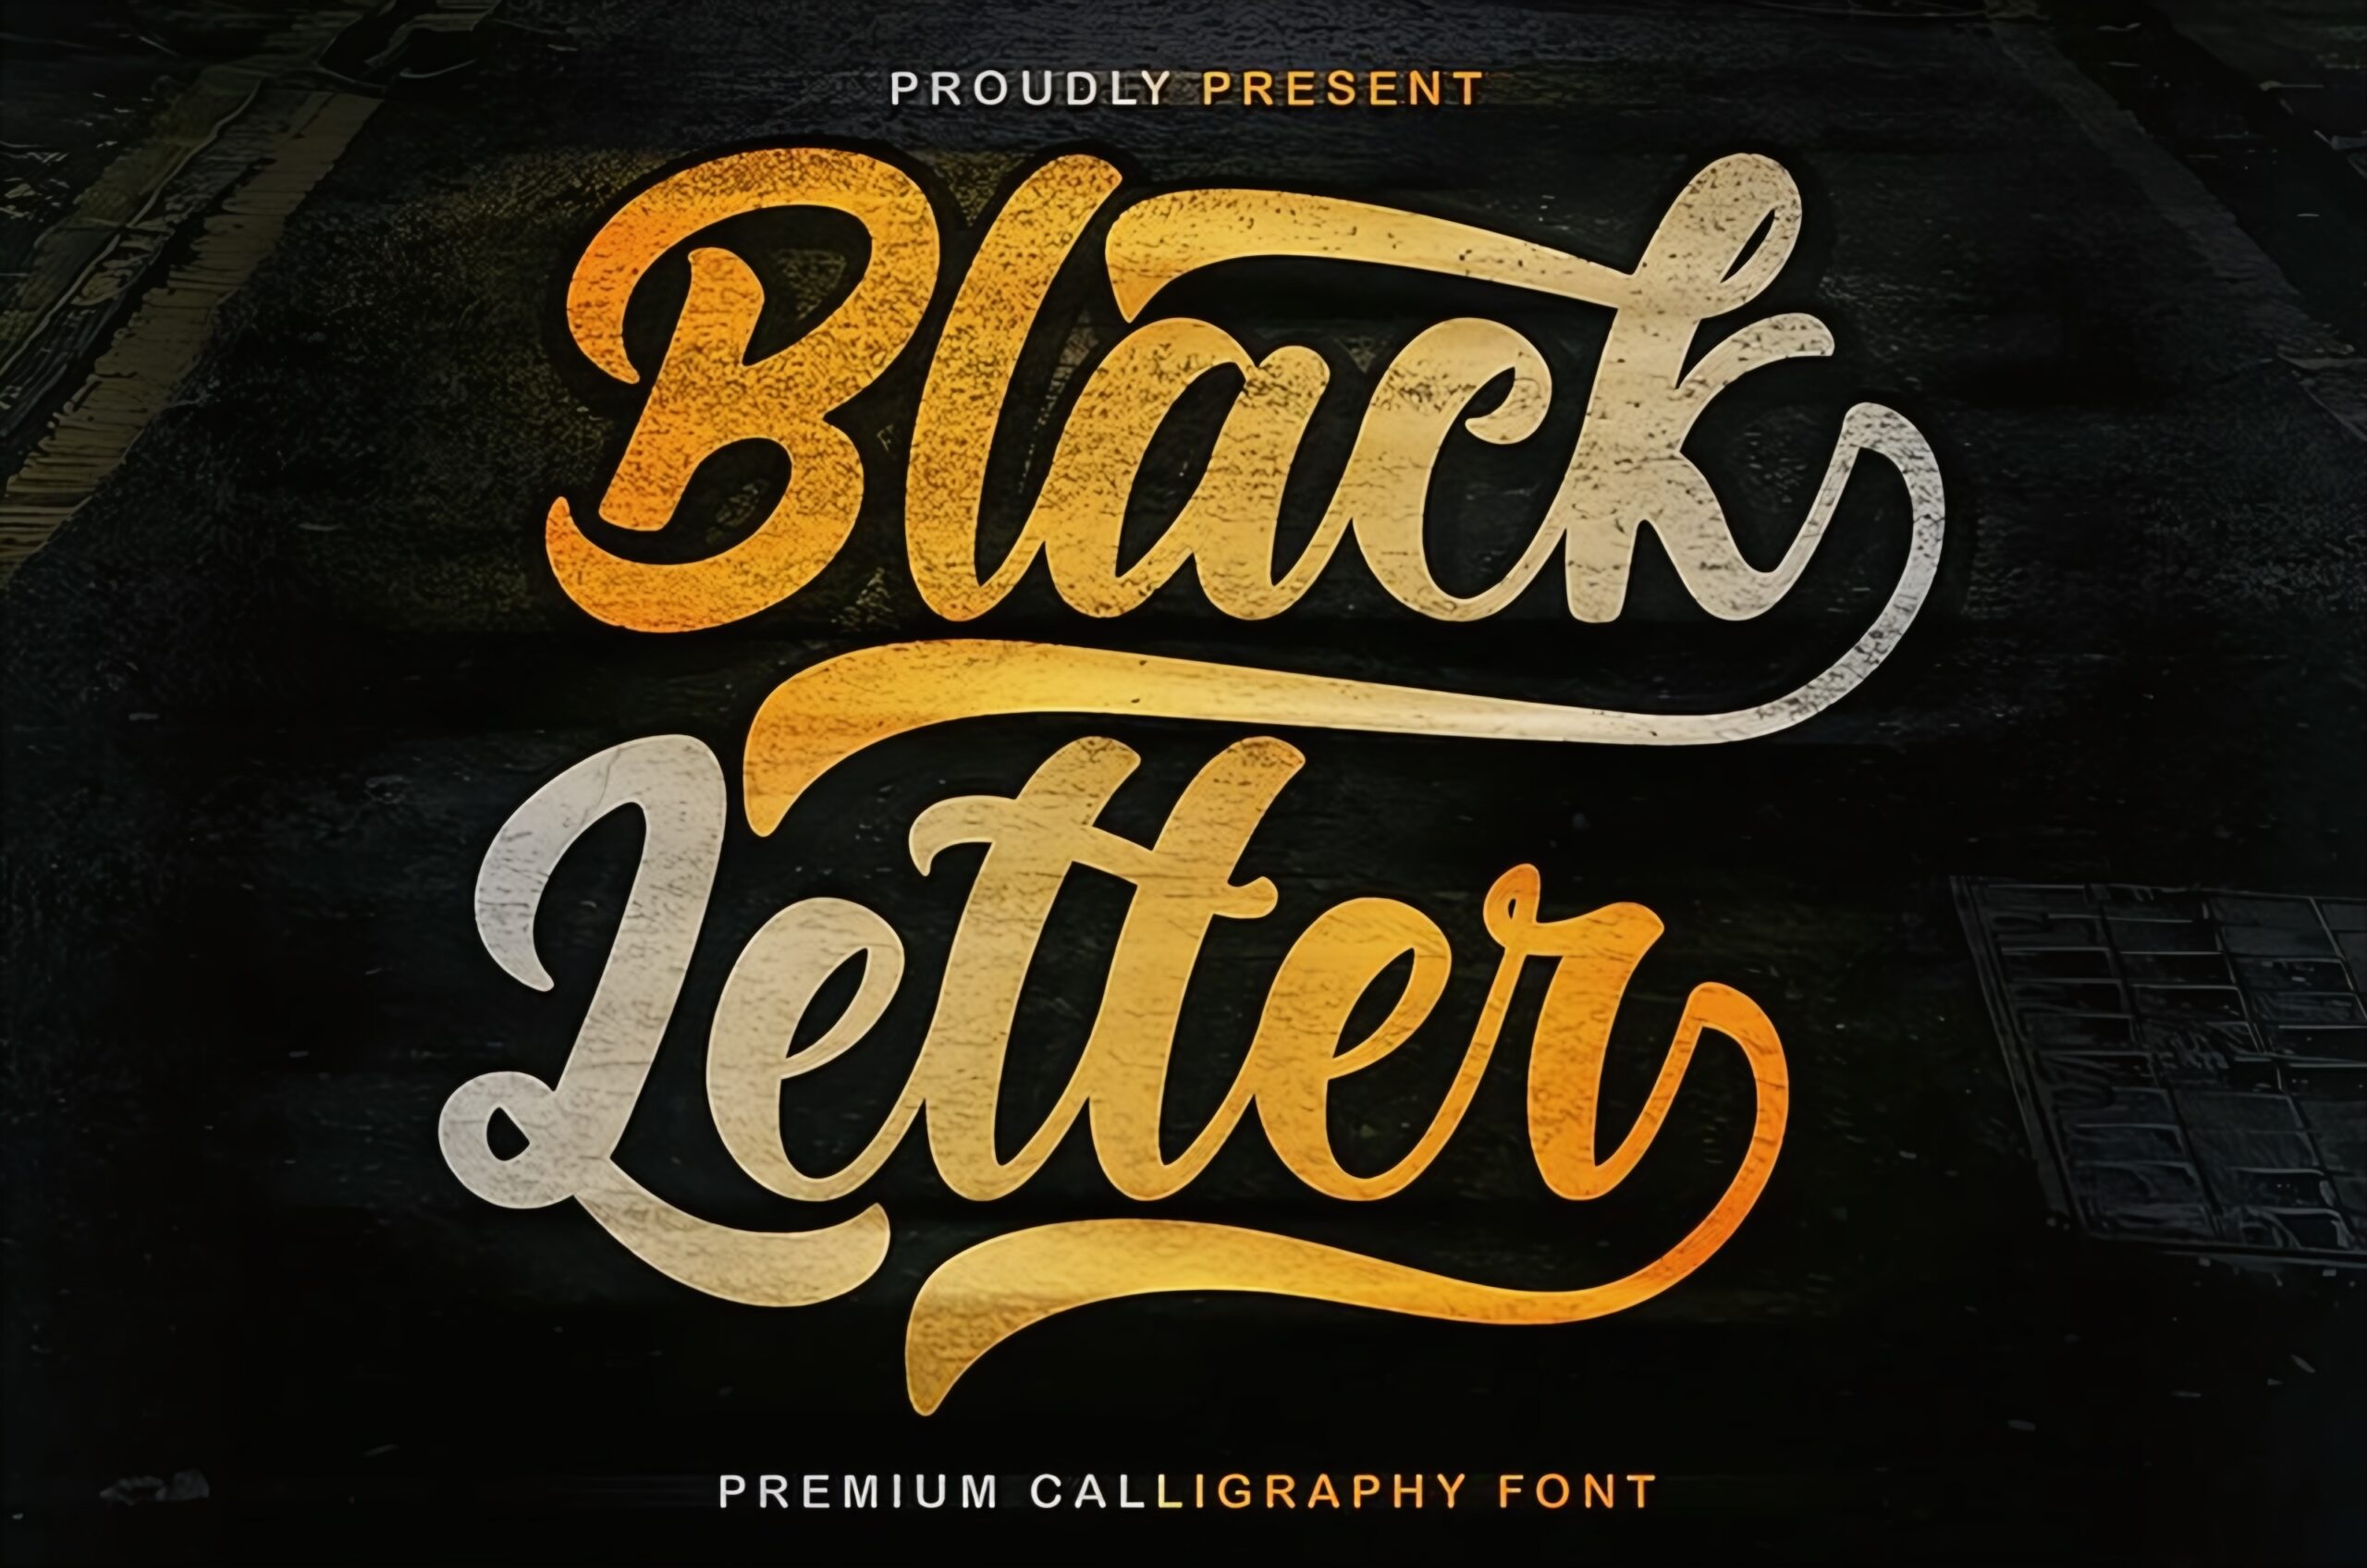 Preview and download Blackletter font